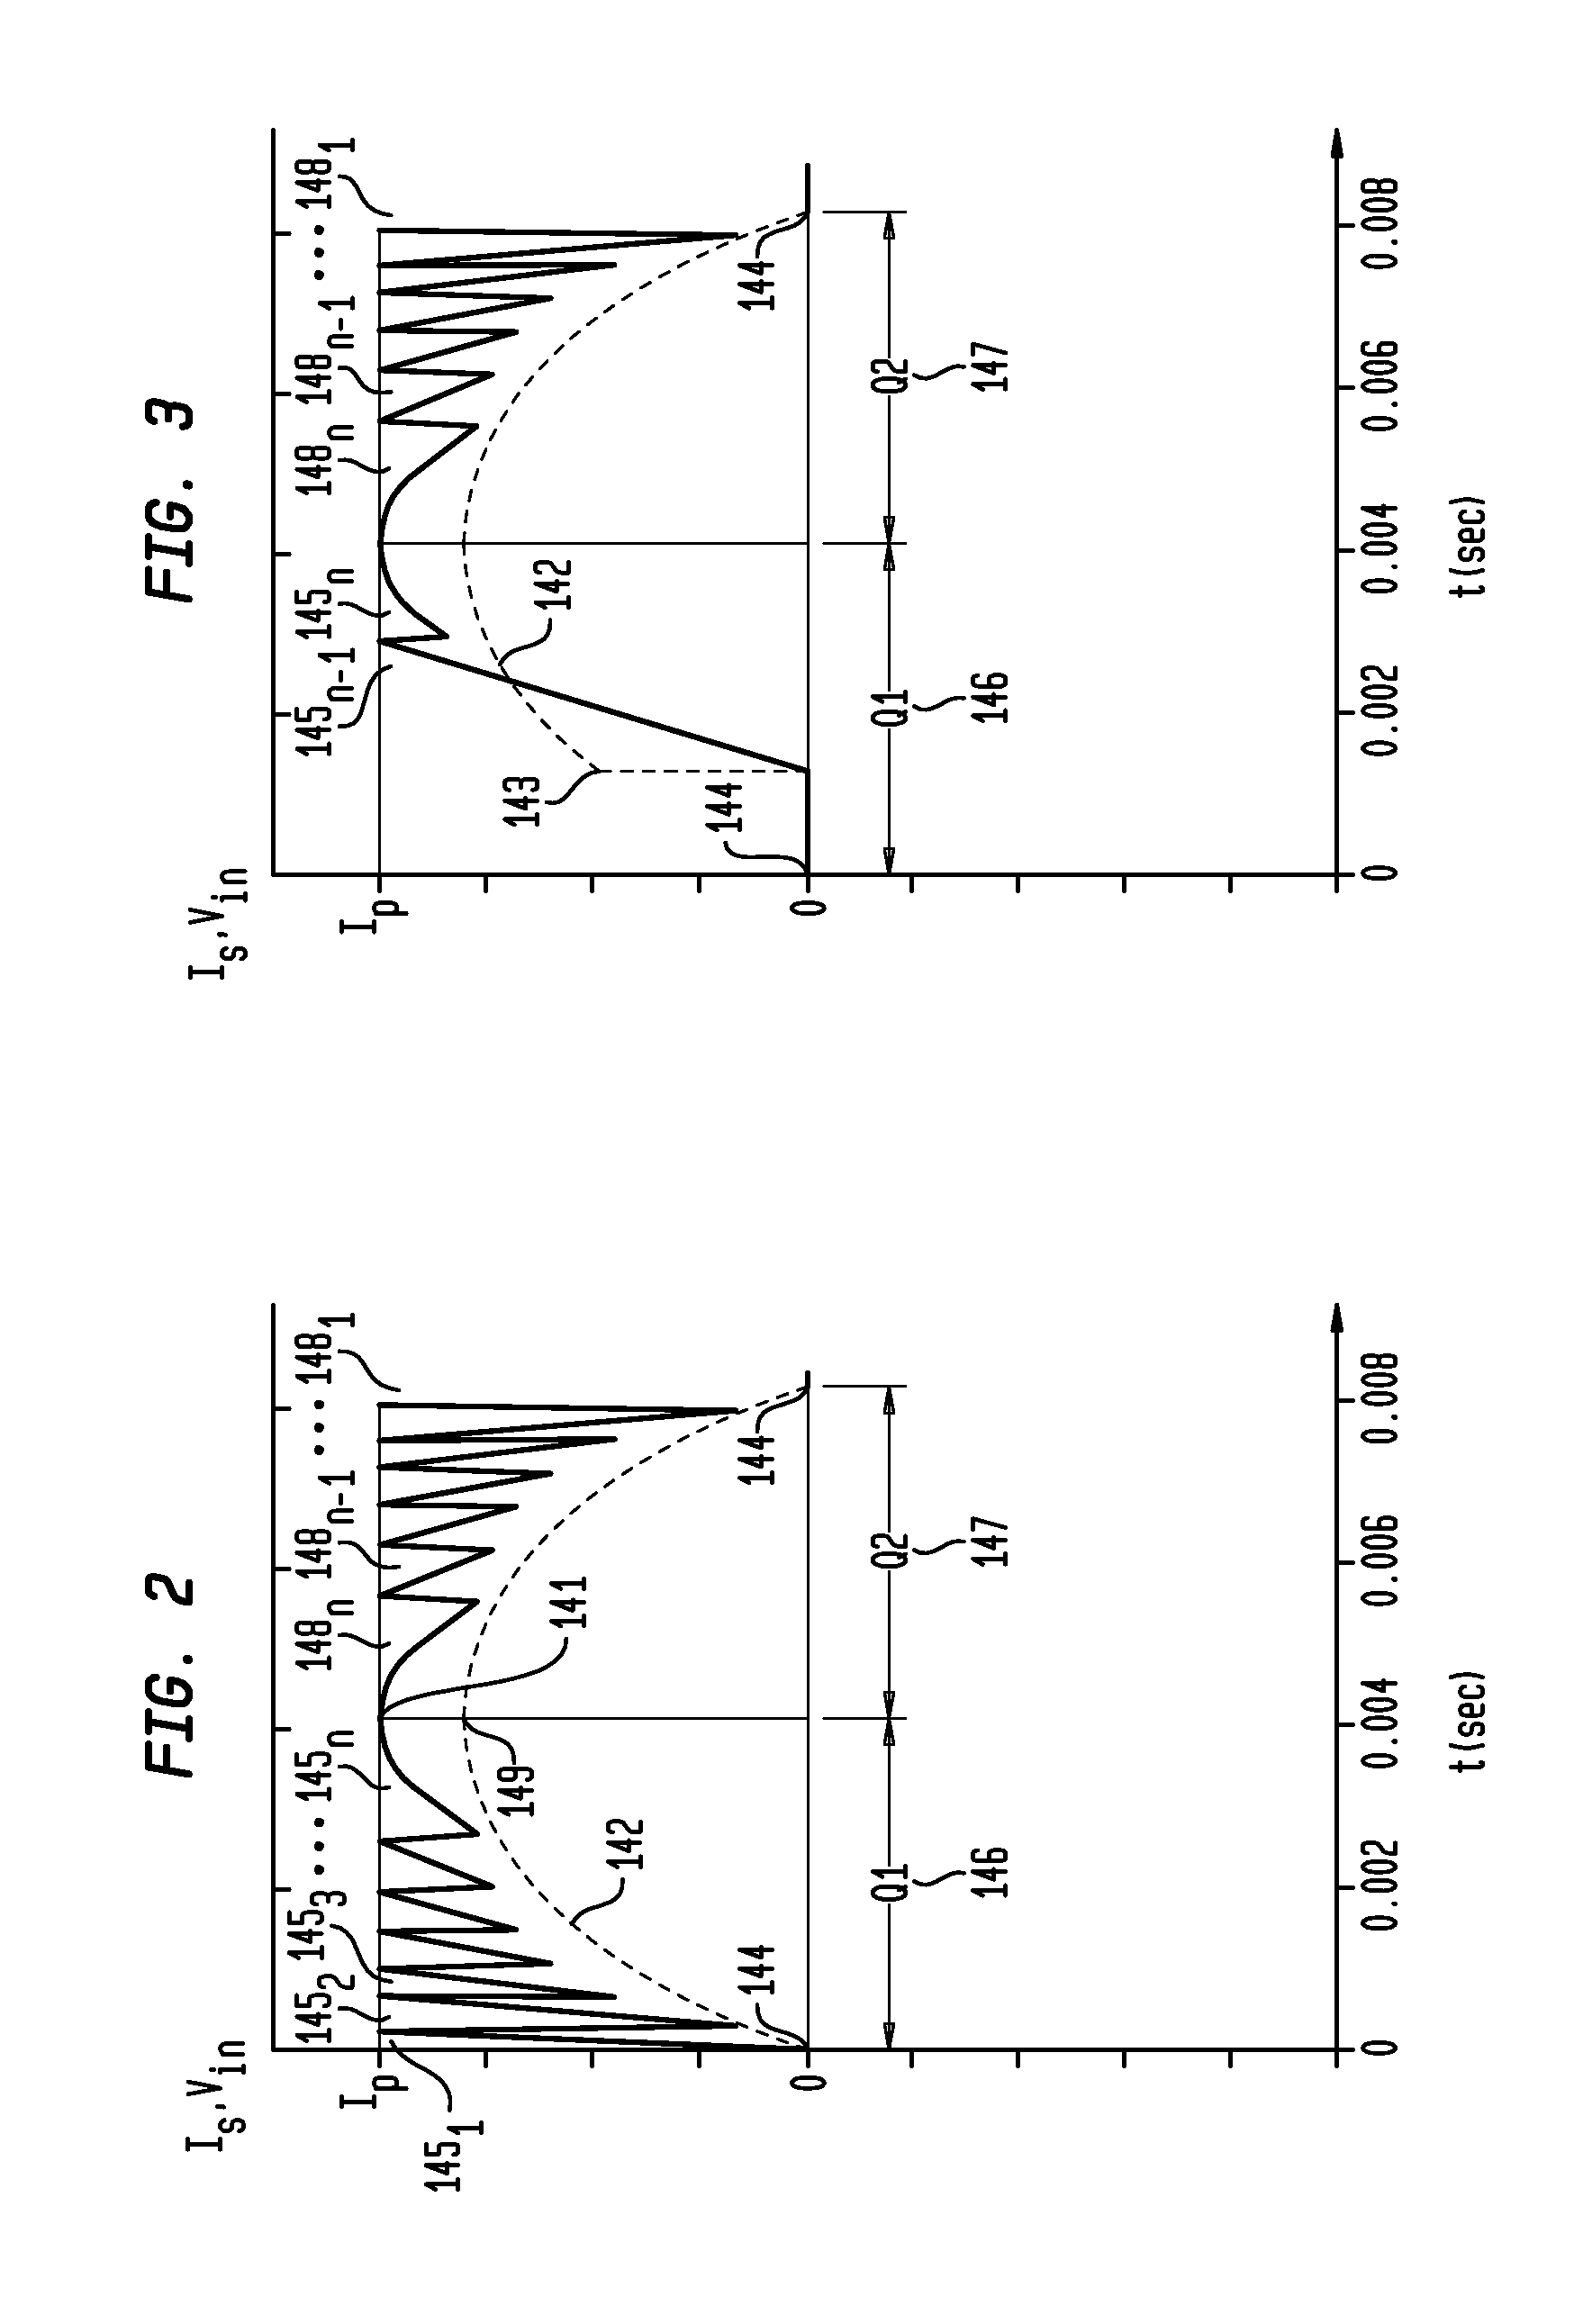 Apparatus, Method and System for Providing AC Line Power to Lighting Devices